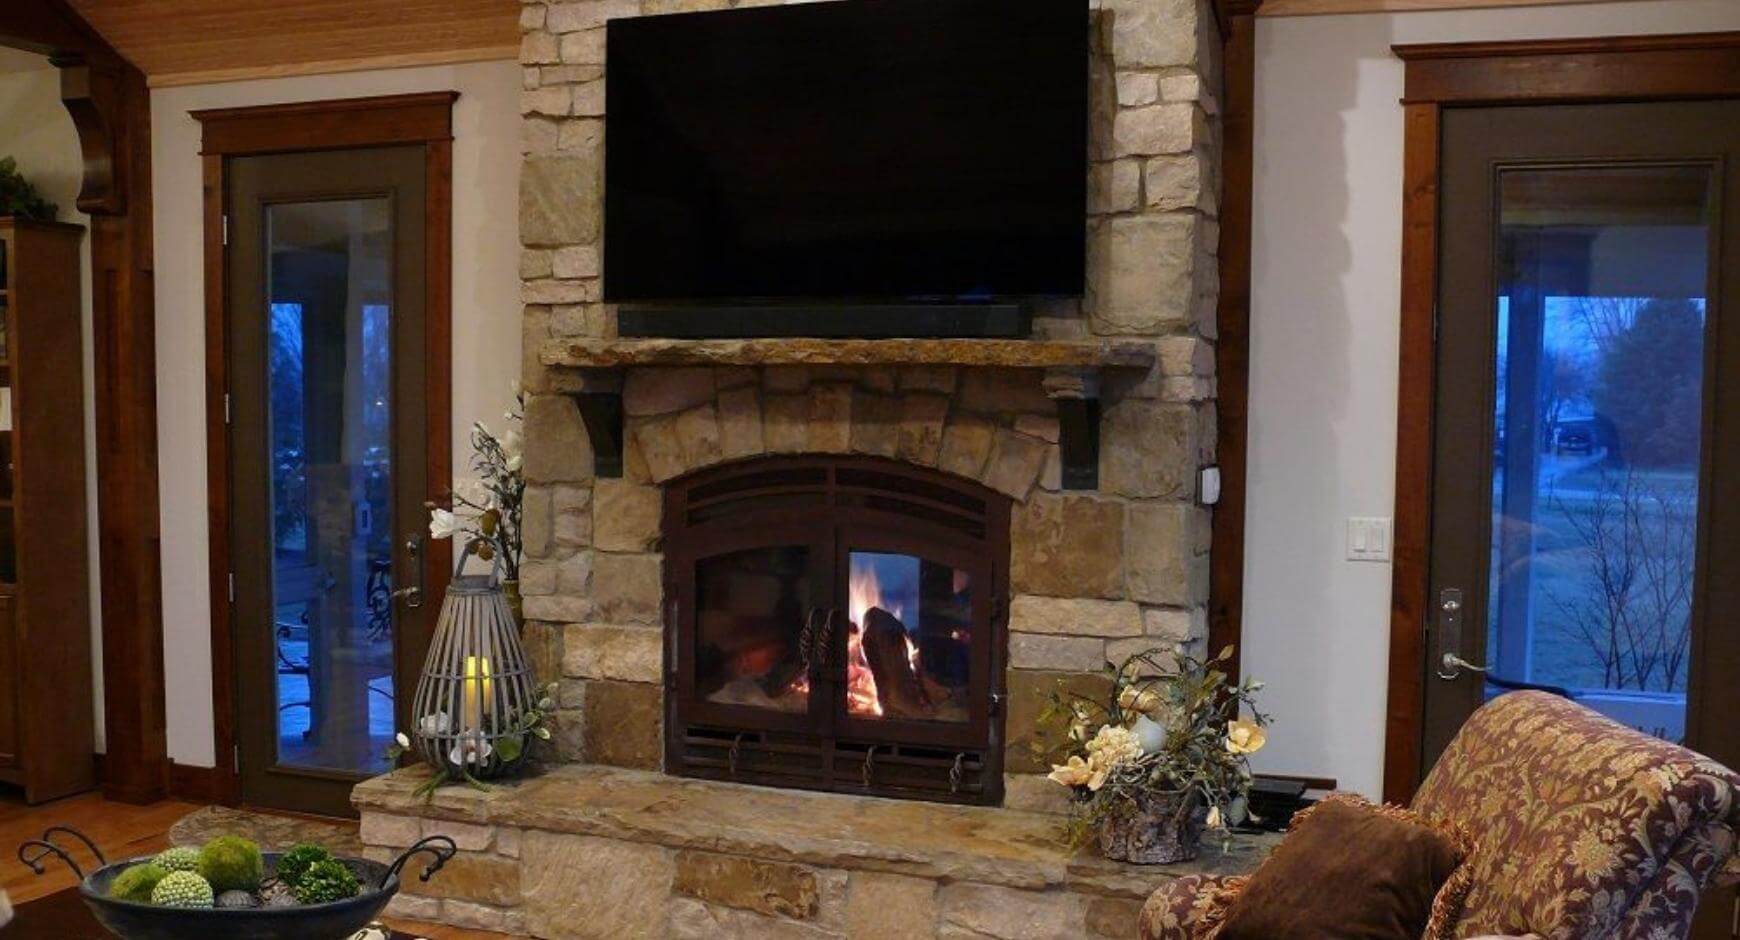 Does a Fireplace Add Value to a Home? Should You Get One?